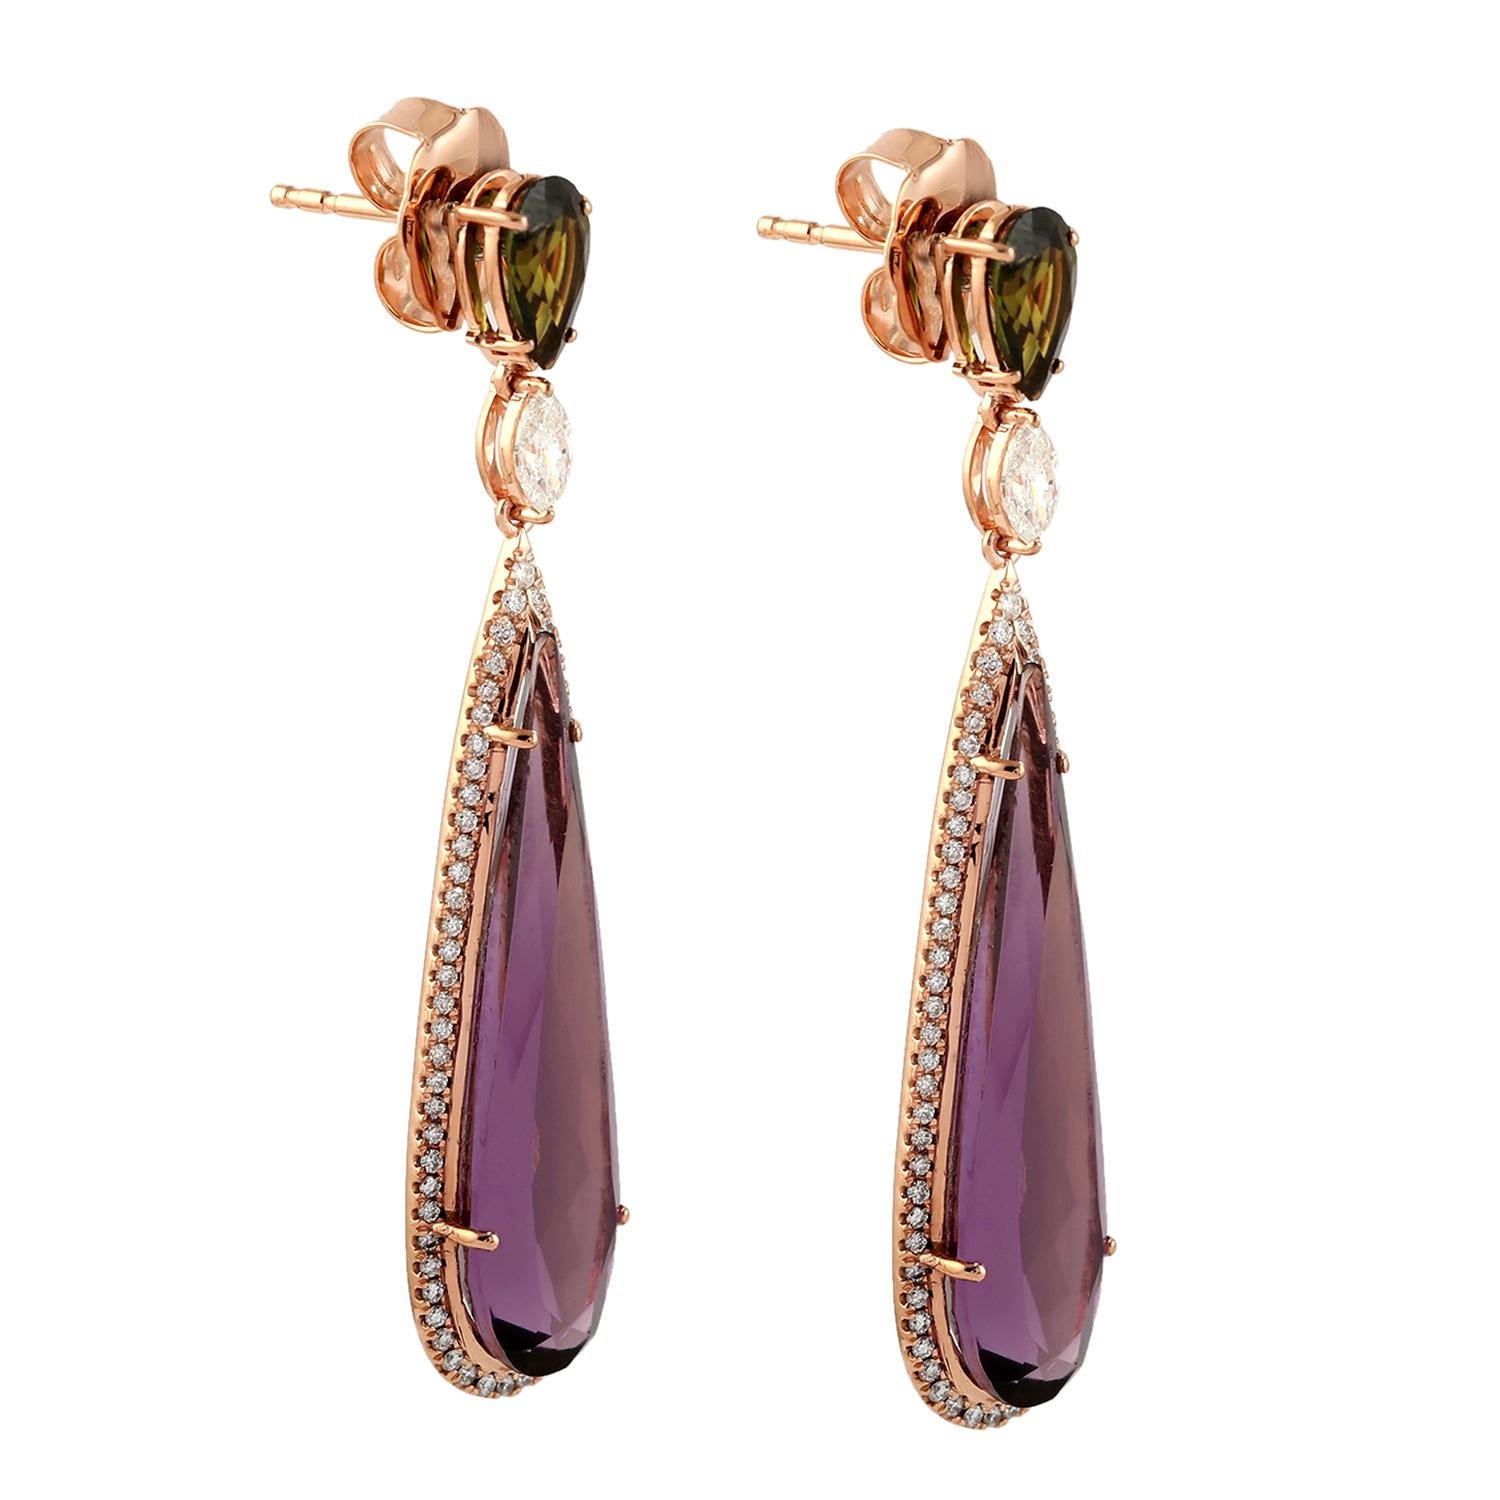 Hand cast from 14-karat gold, these stunning earrings are set with 15.78 carats amethyst. 1.45 carats tourmaline and 1.0 carats of sparkling diamonds.

FOLLOW  MEGHNA JEWELS storefront to view the latest collection & exclusive pieces.  Meghna Jewels